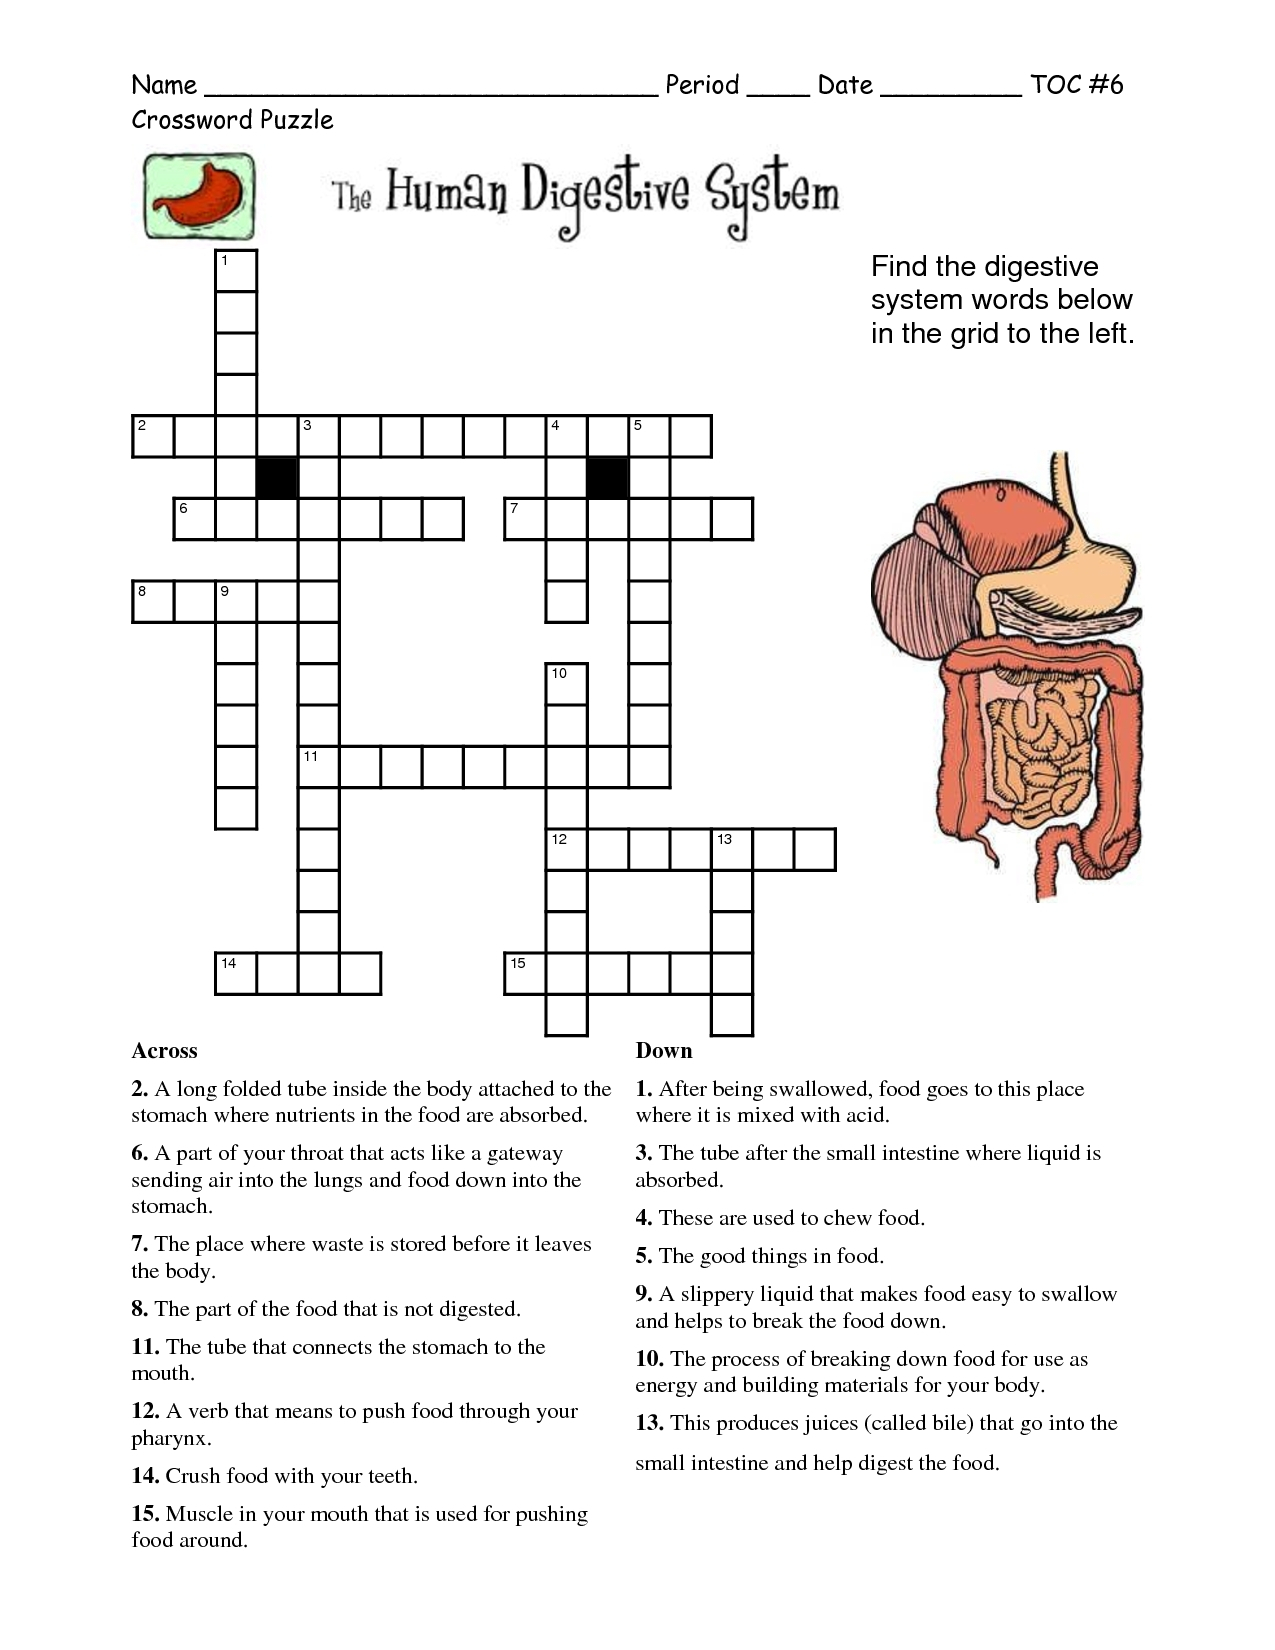 Crossword About Digestive System Tag Digestive System Crossword - Anatomy Crossword Puzzles Printable